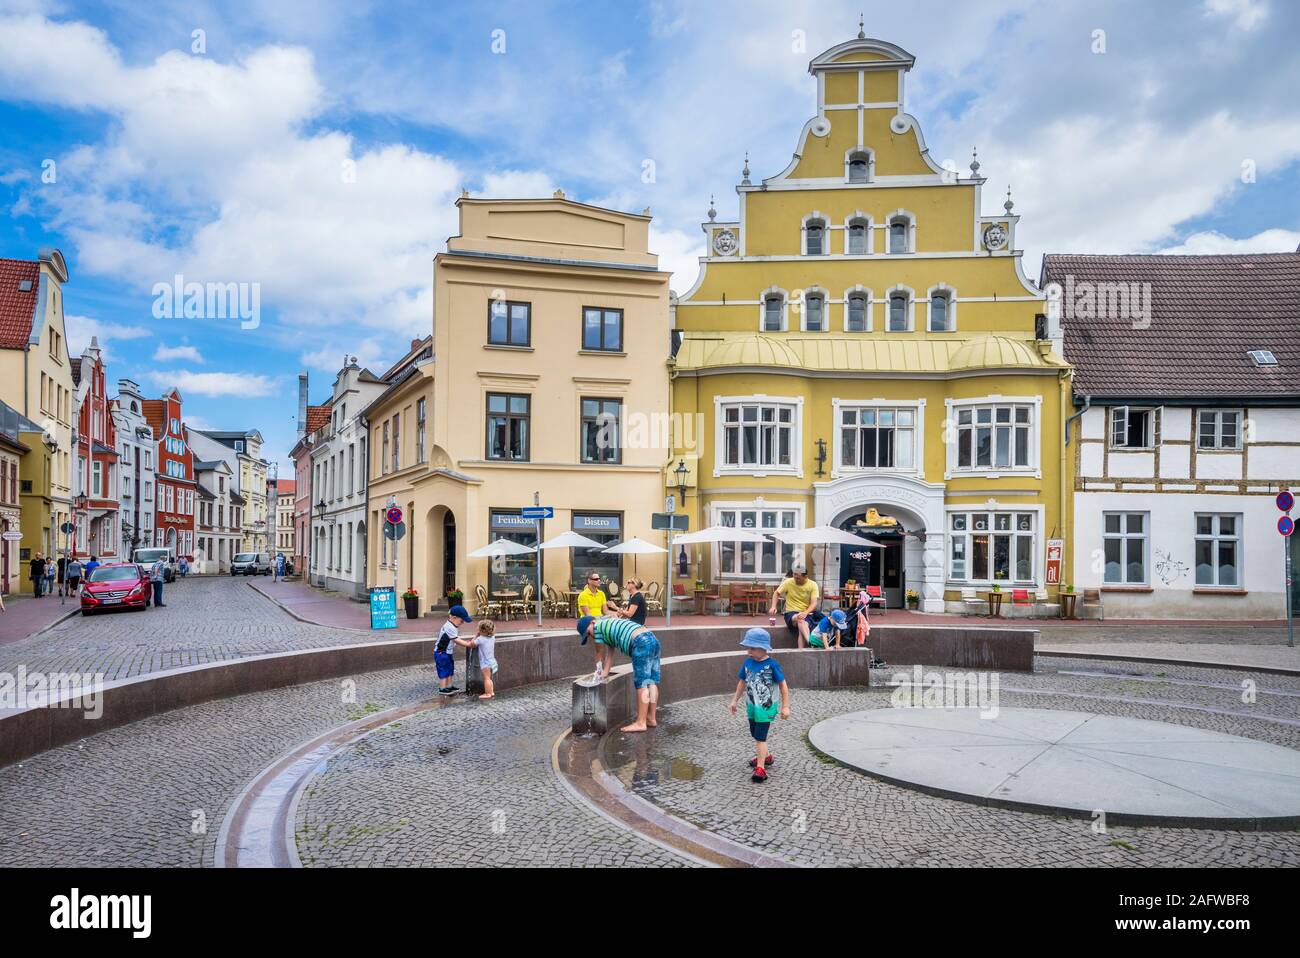 fountain in the historic center of the Hanseatic City of Wismar, Mecklenburg-Vorpommern, Germany Stock Photo